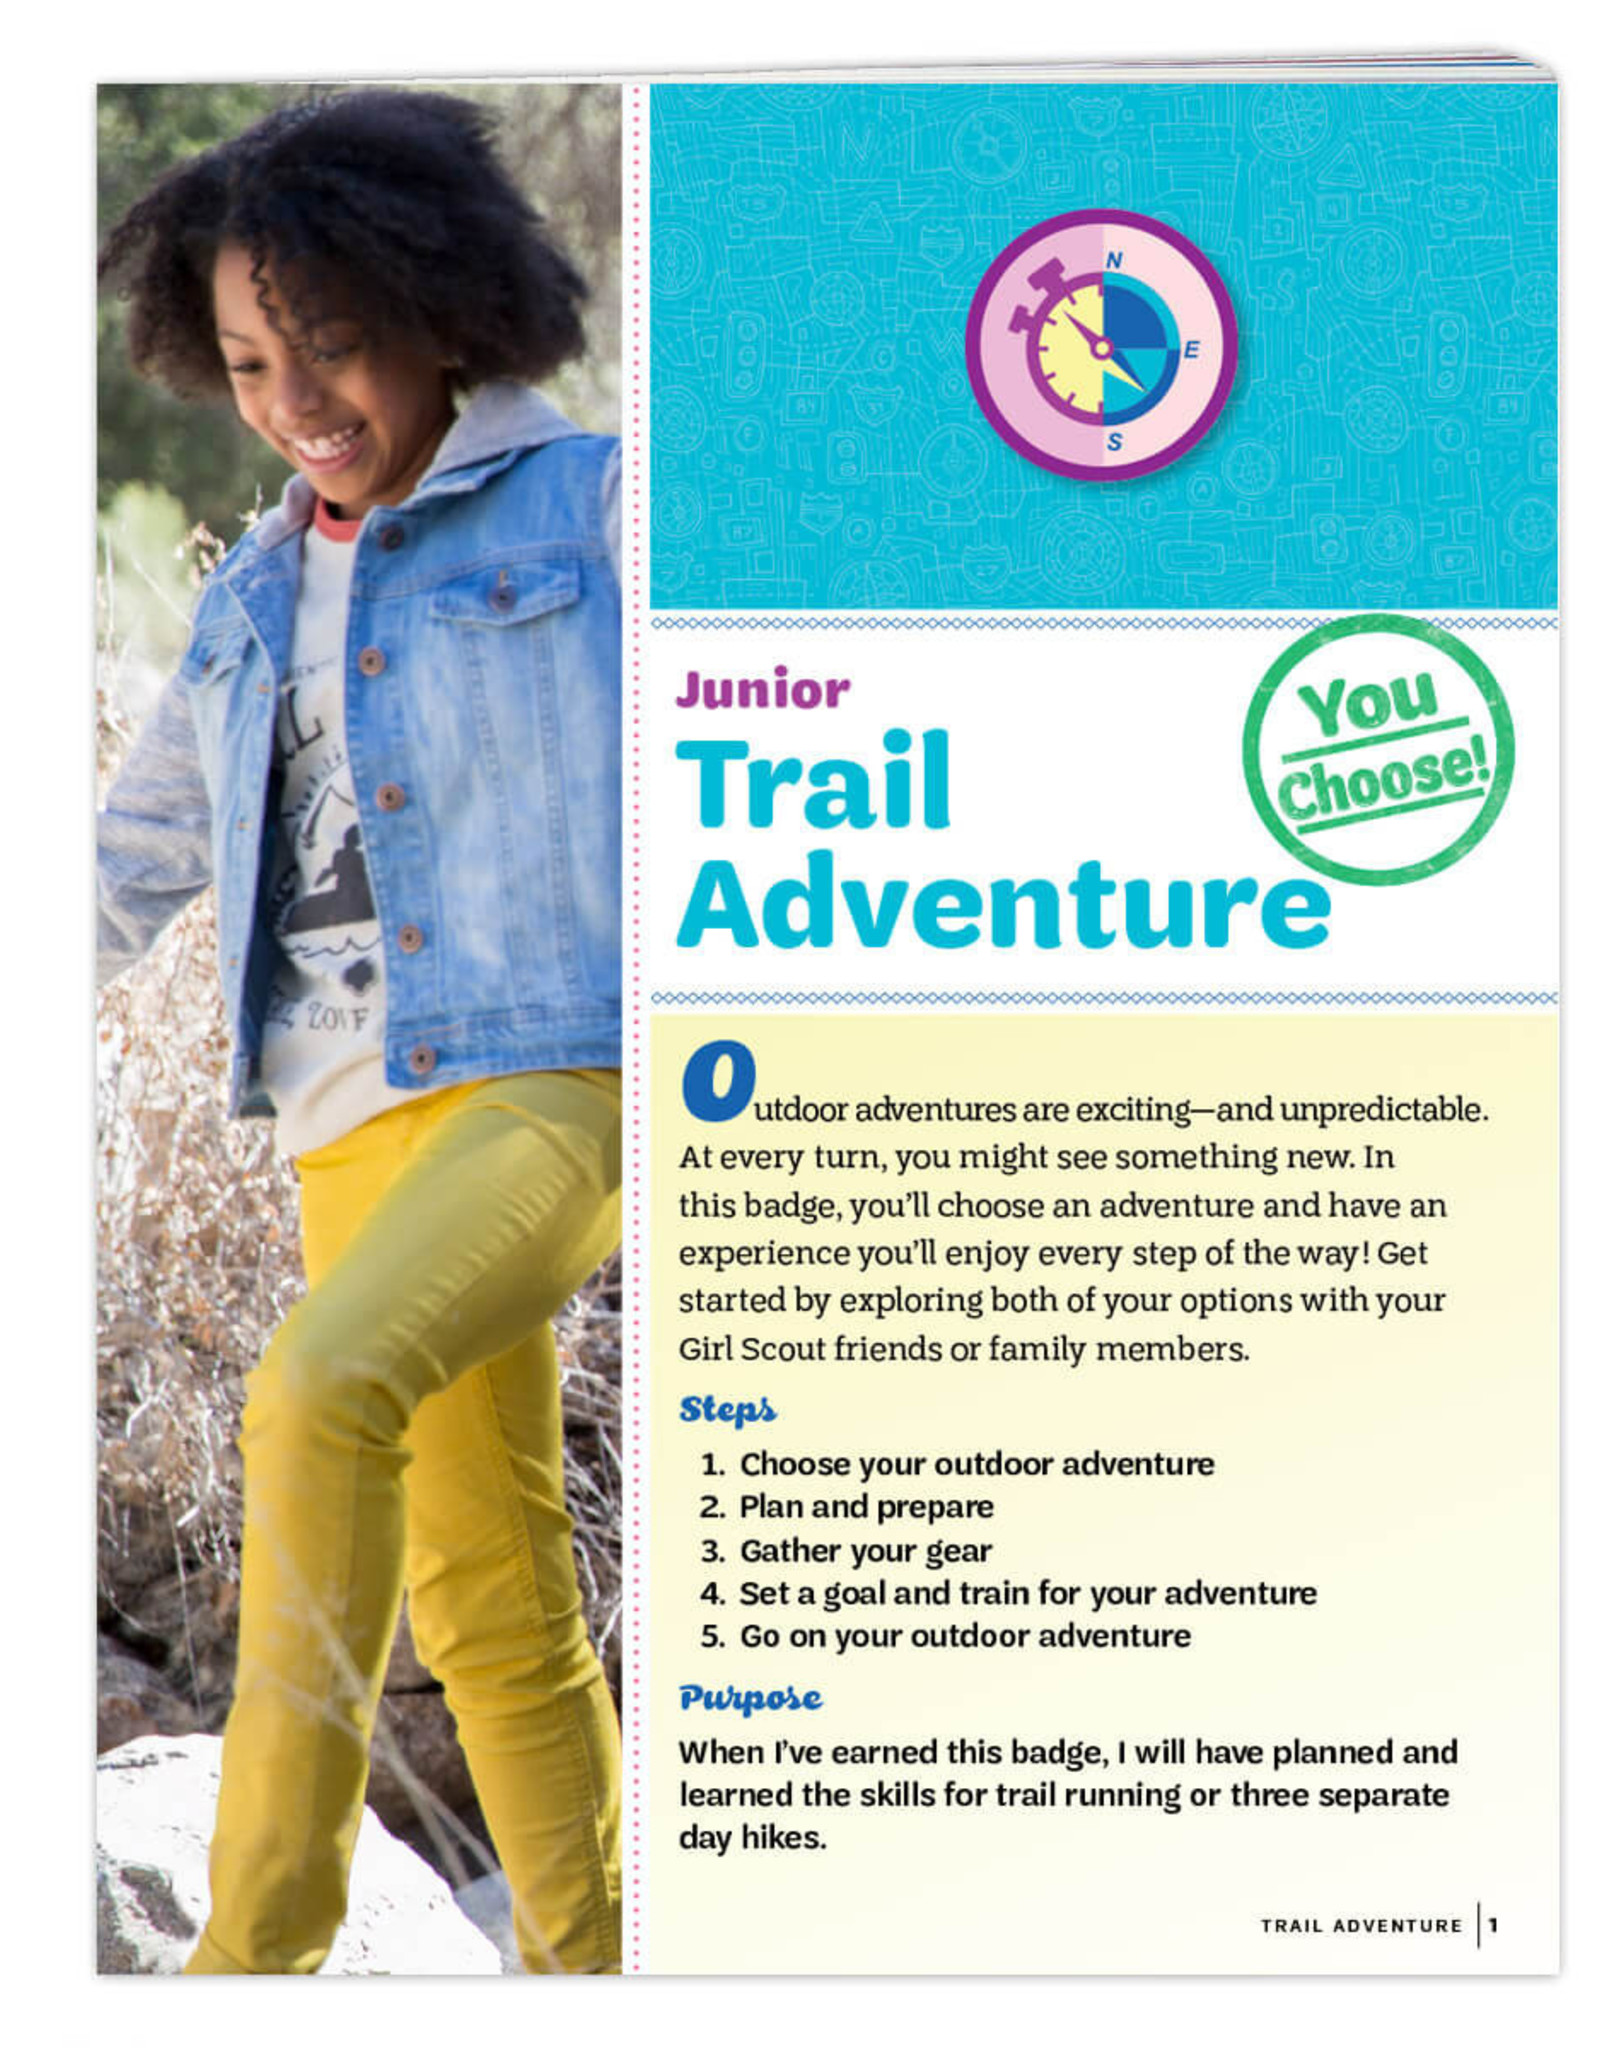 GIRL SCOUTS OF THE USA Junior Trail Adventure Requirements Pamphlet